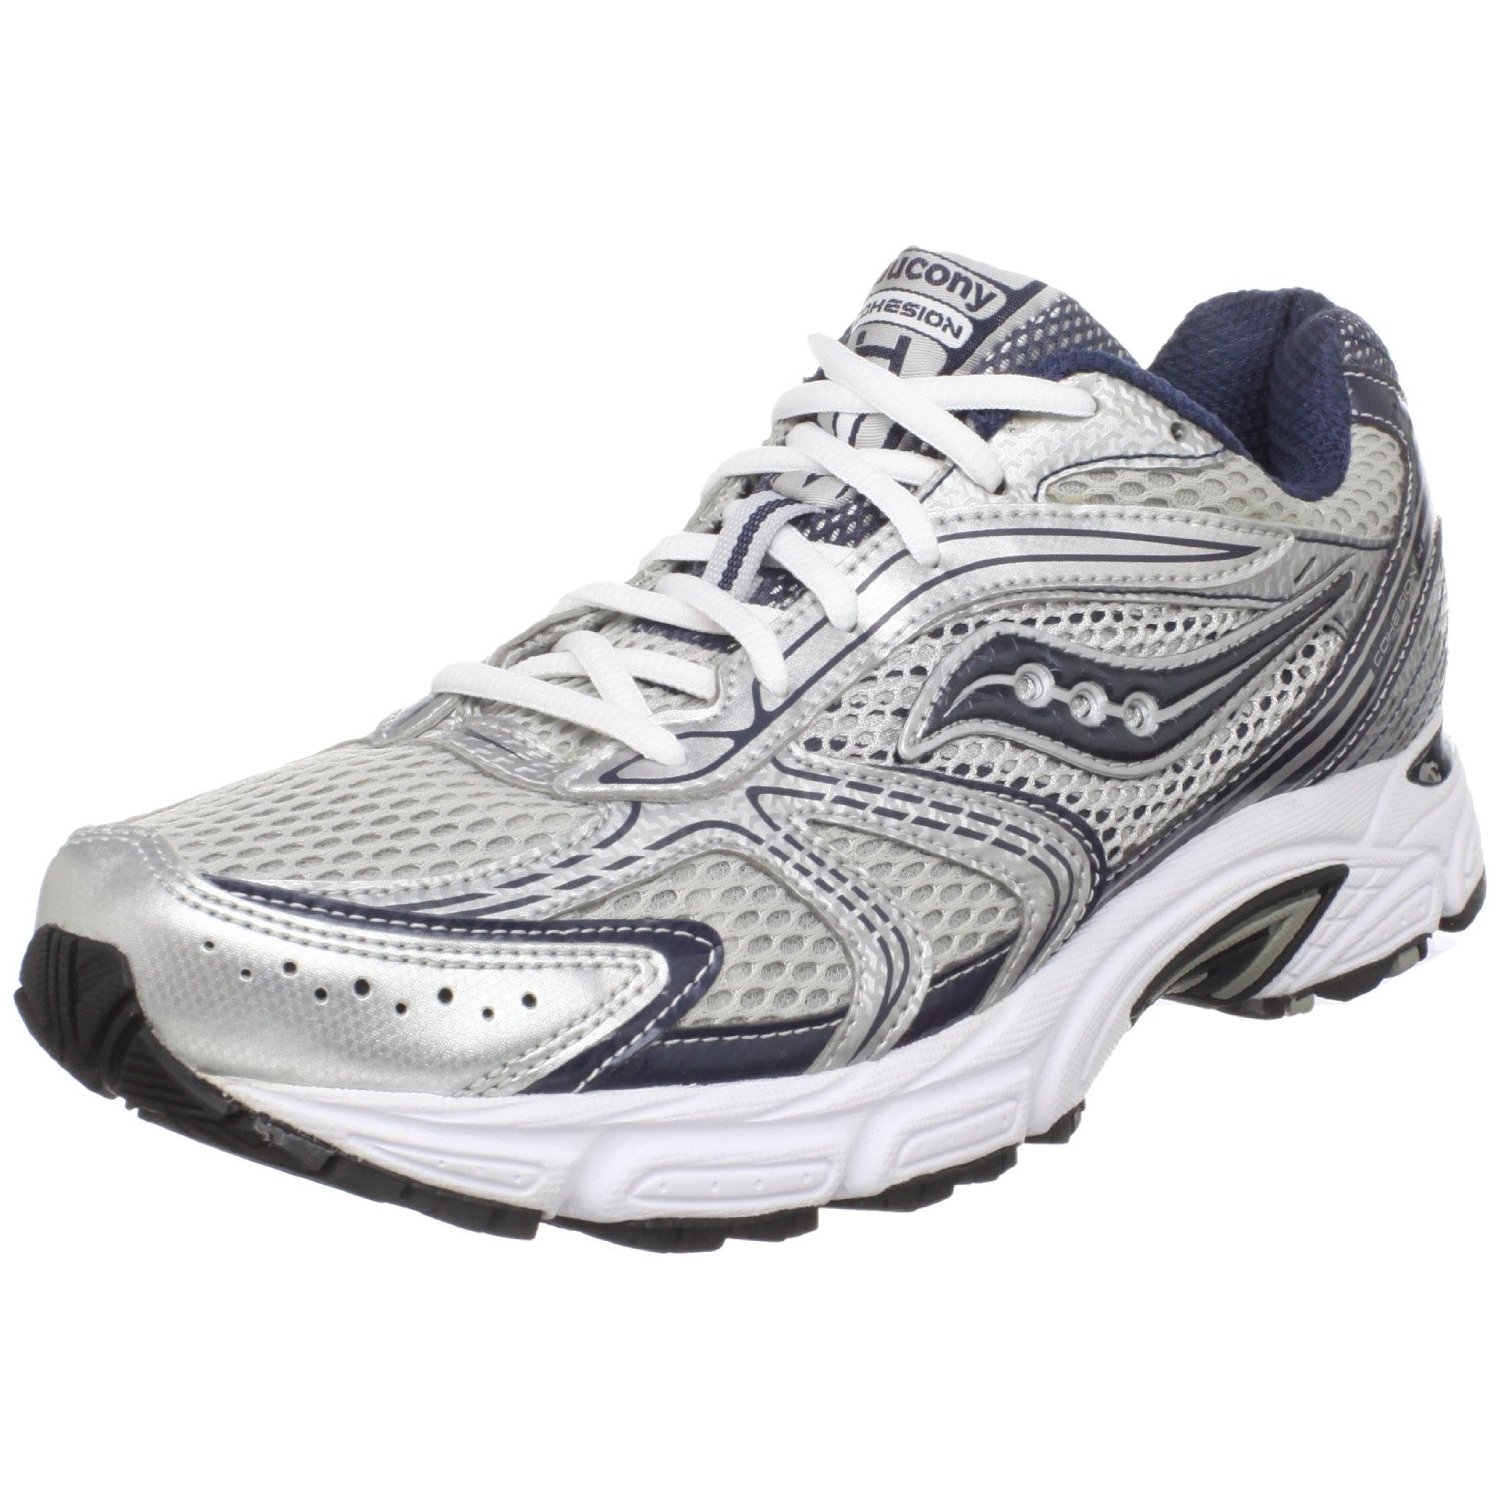 saucony grid cohesion 4 leather running shoes